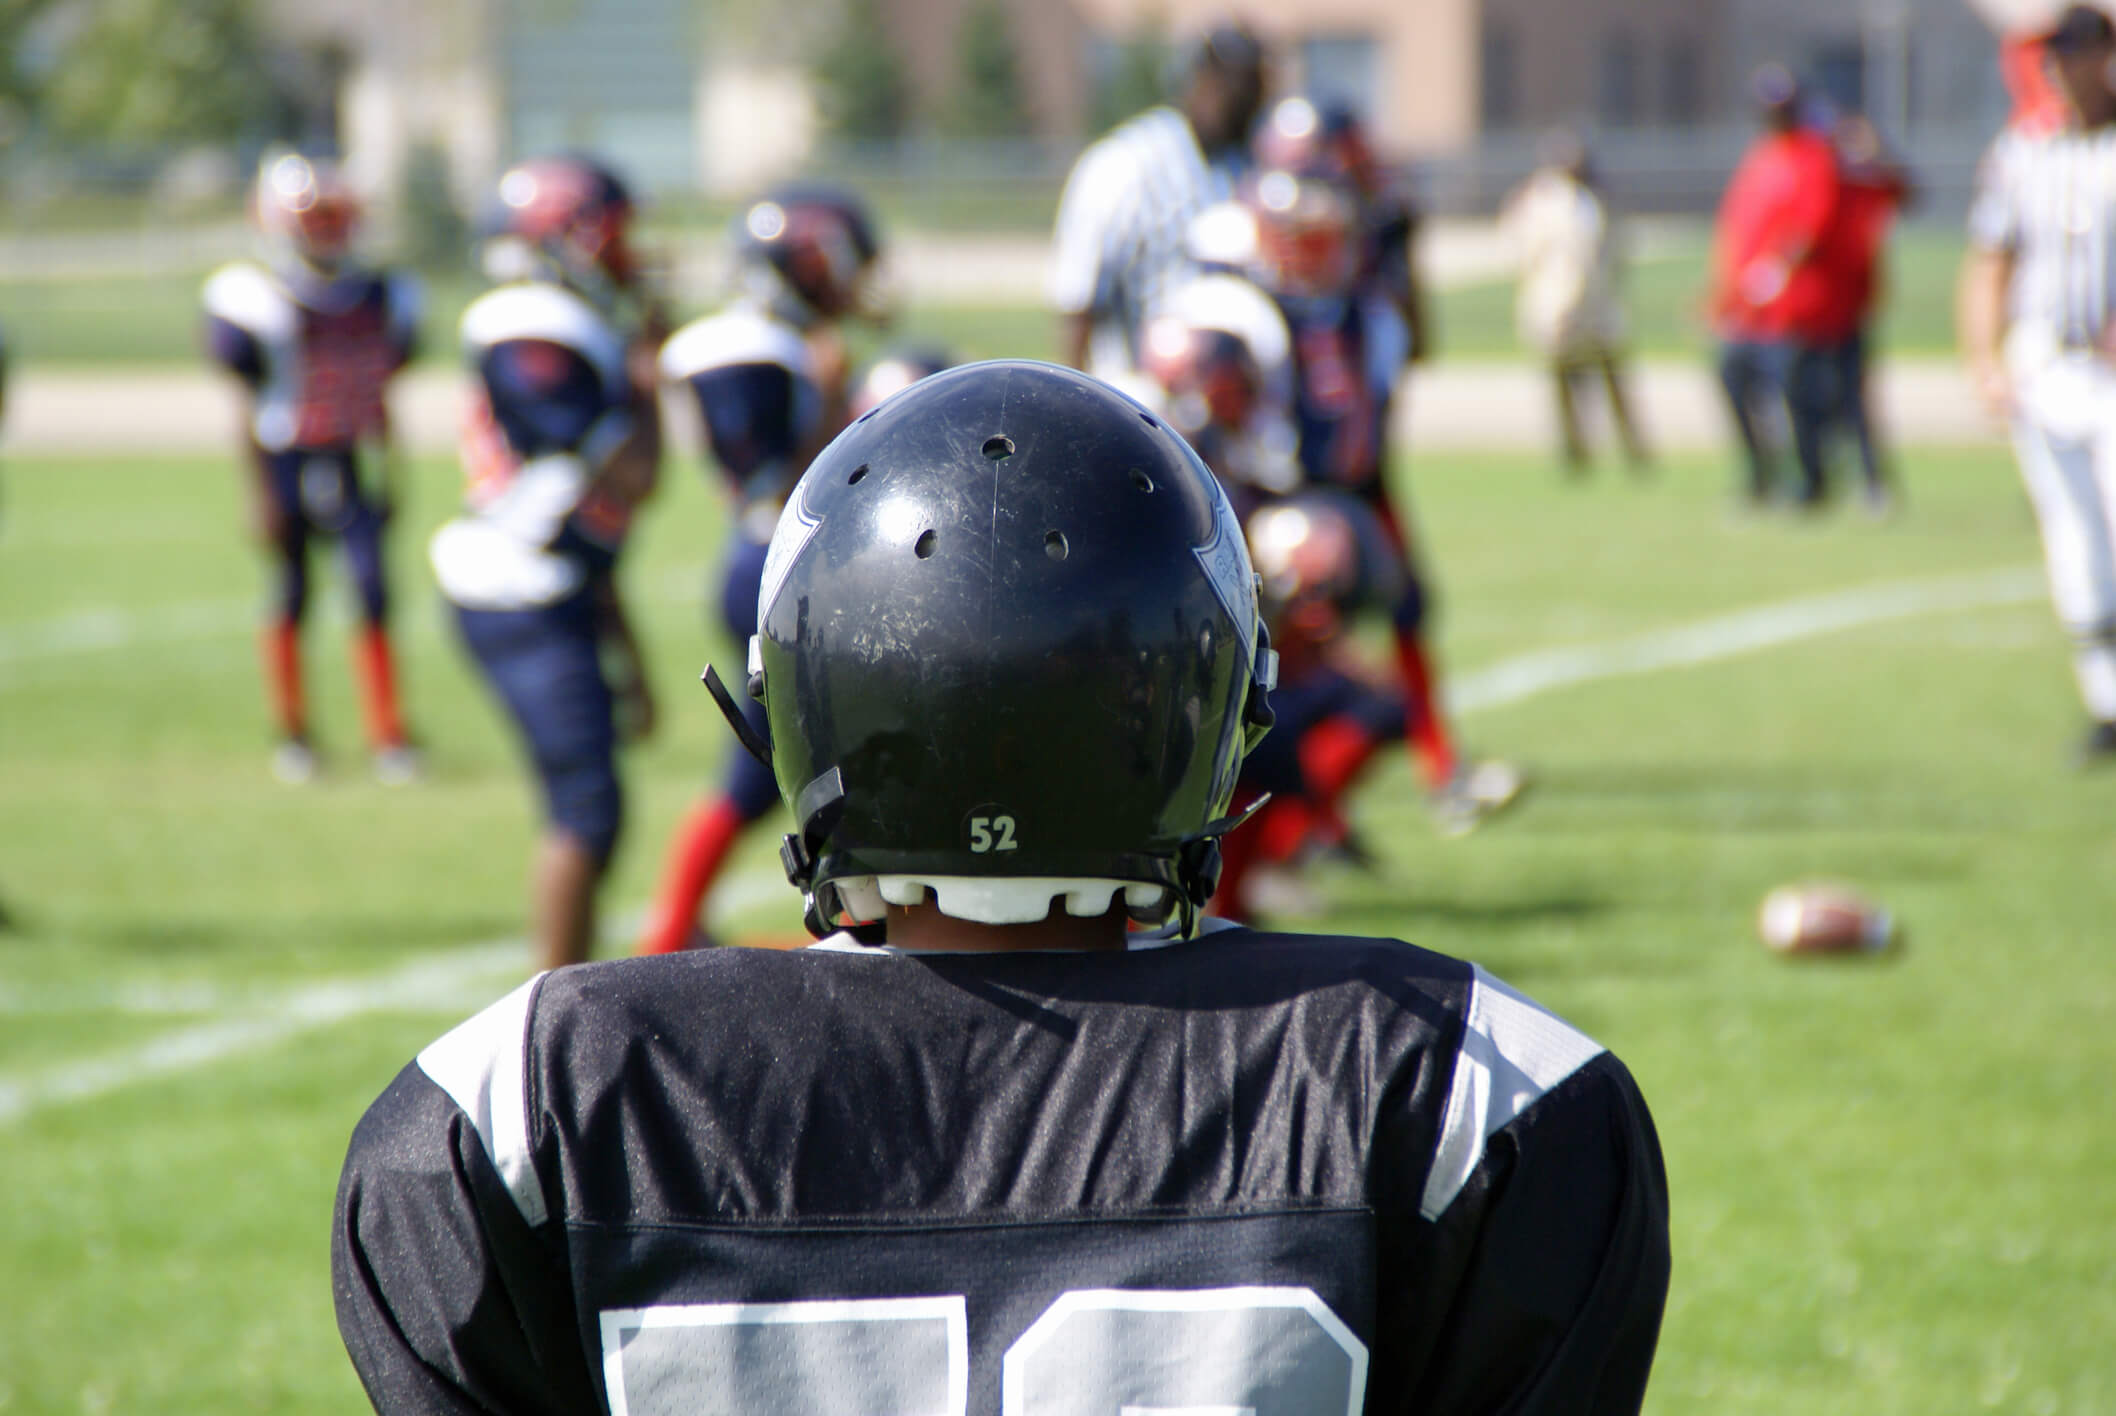 Youth tackle football: CA considers banning it for kids under 12